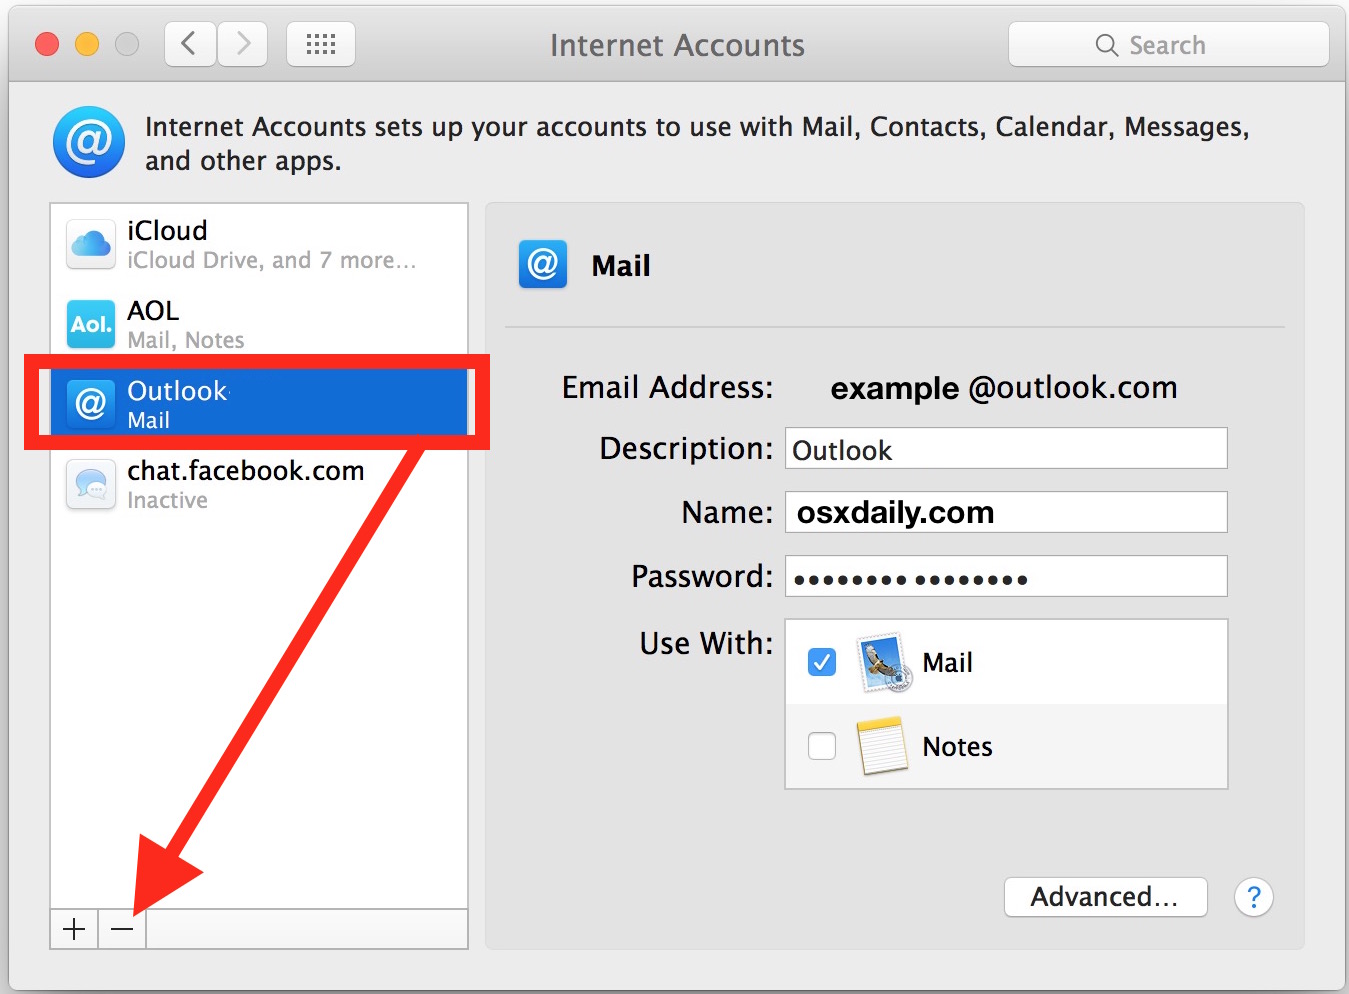 Select and delete the email account in question from Internet accounts in Mac OS X